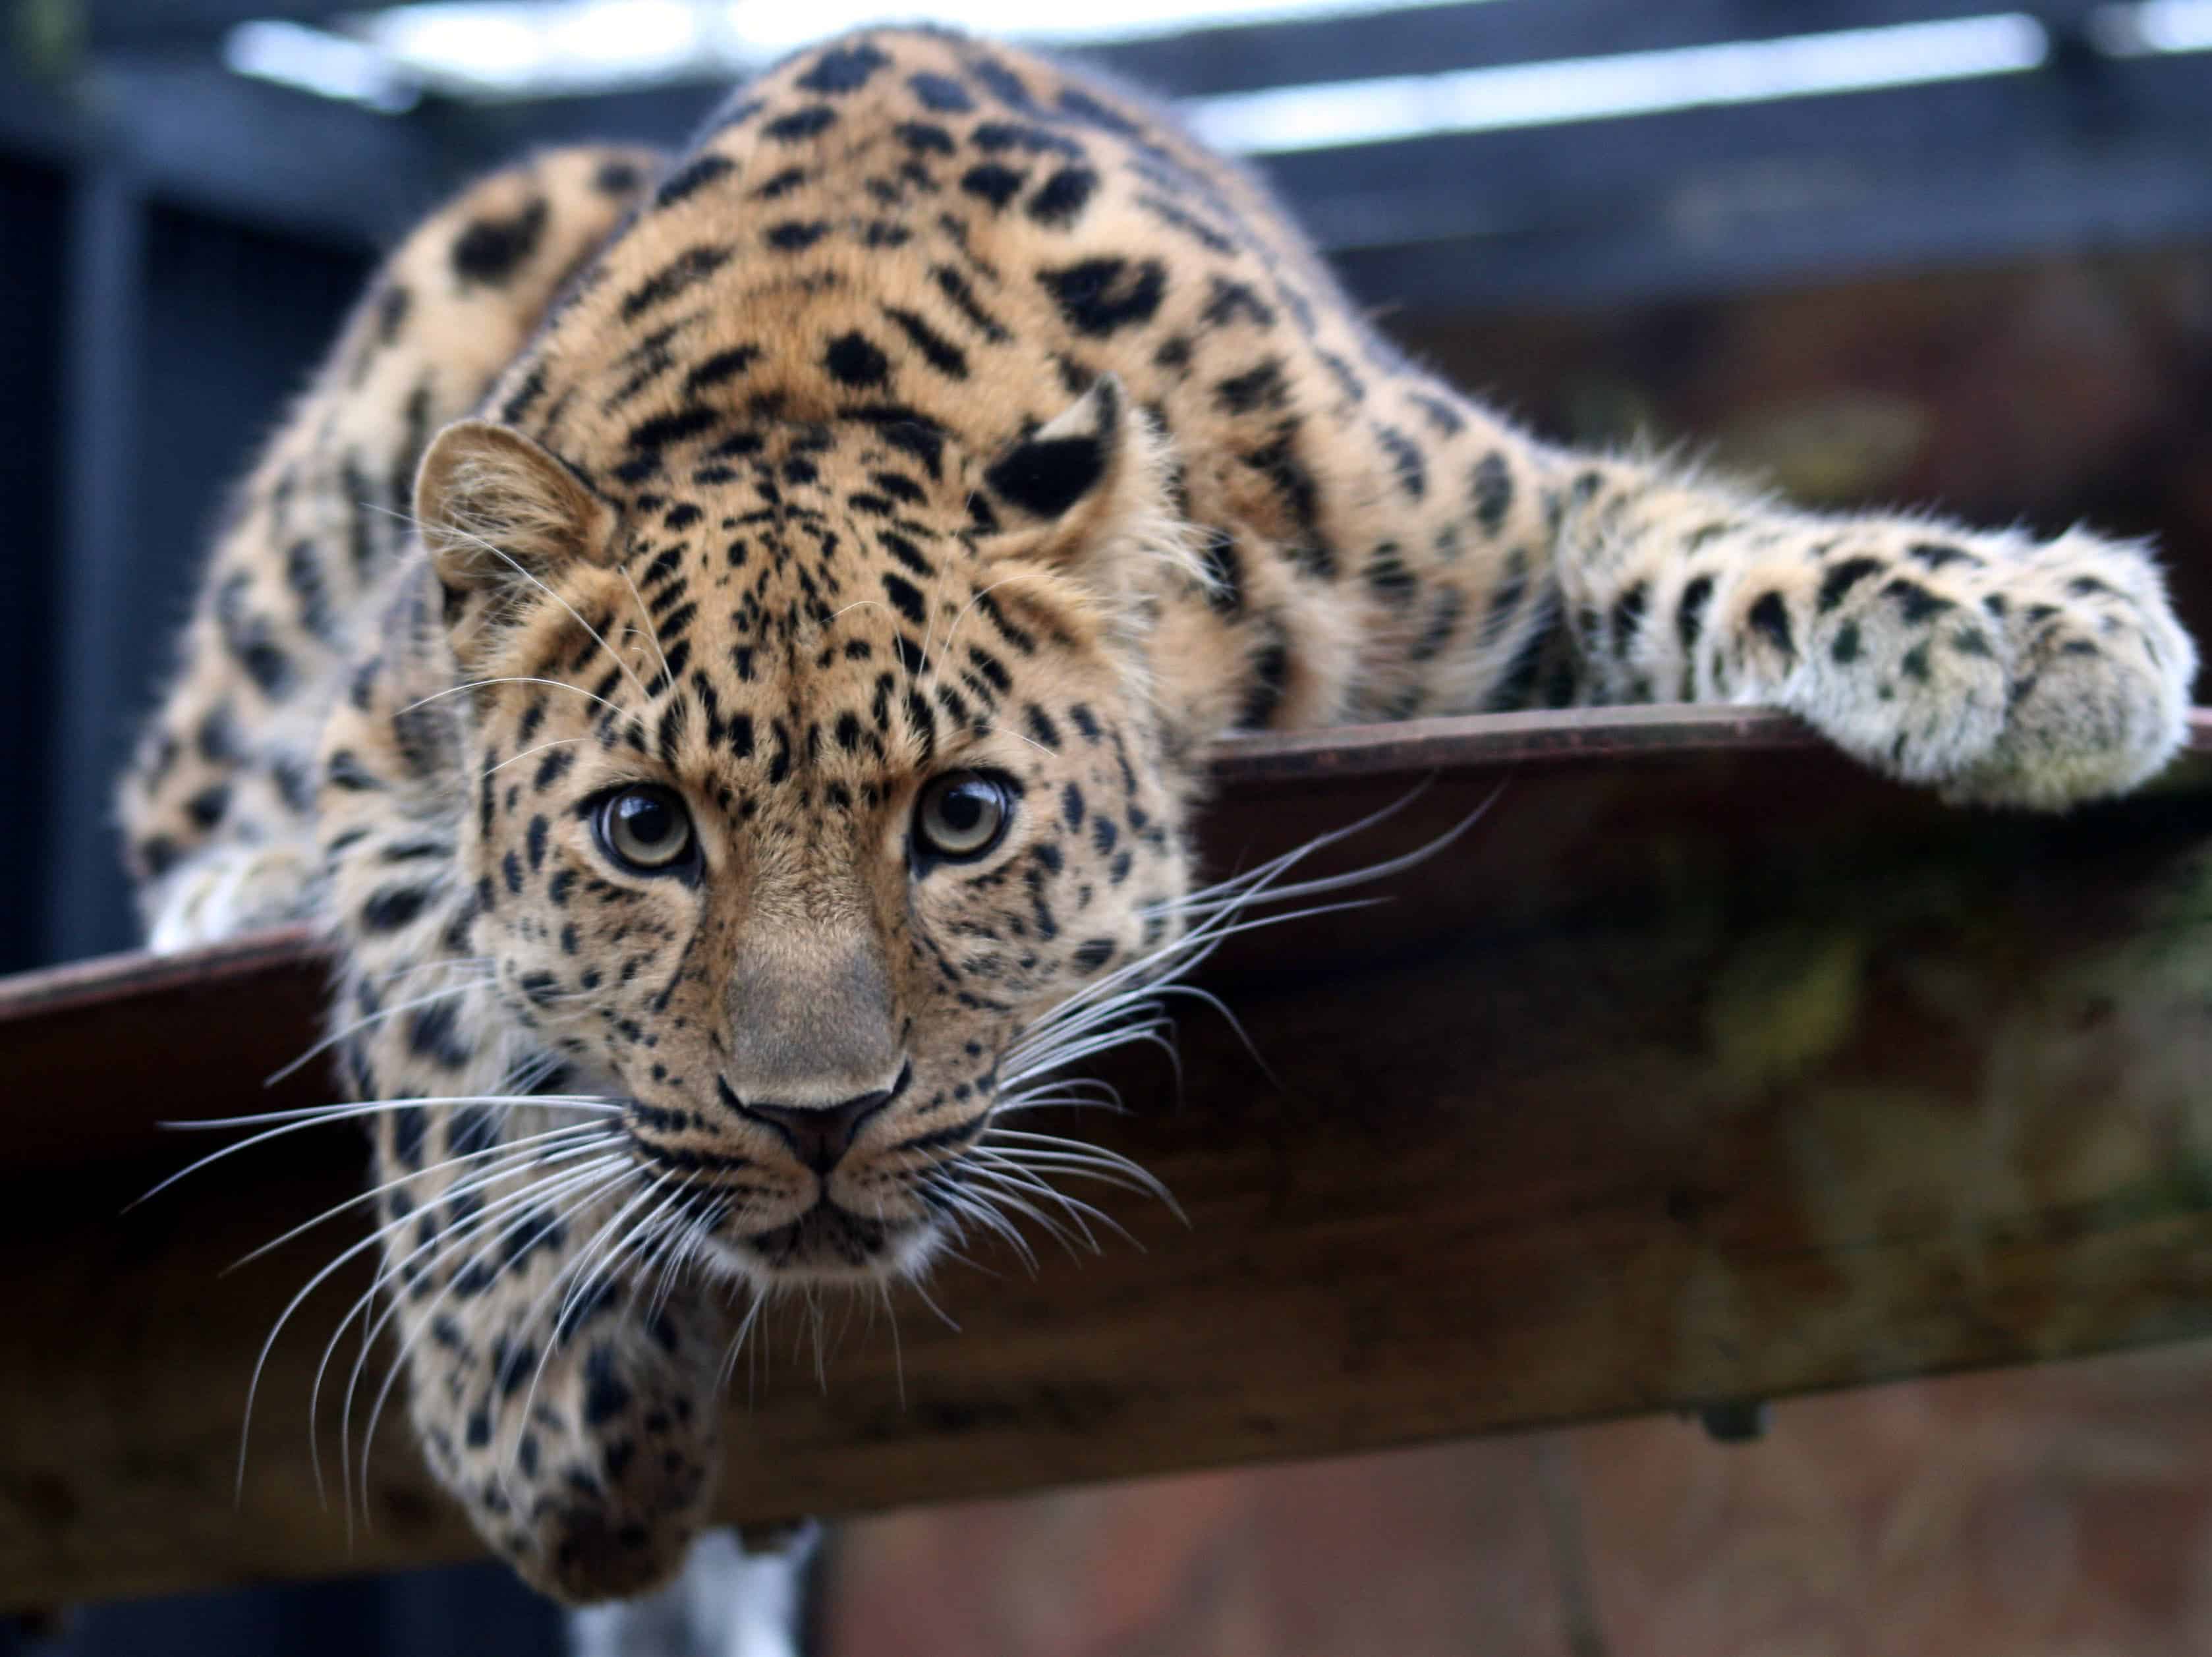 Amur Leopard in the Colchester Zoo. Image credits: Keven Law.